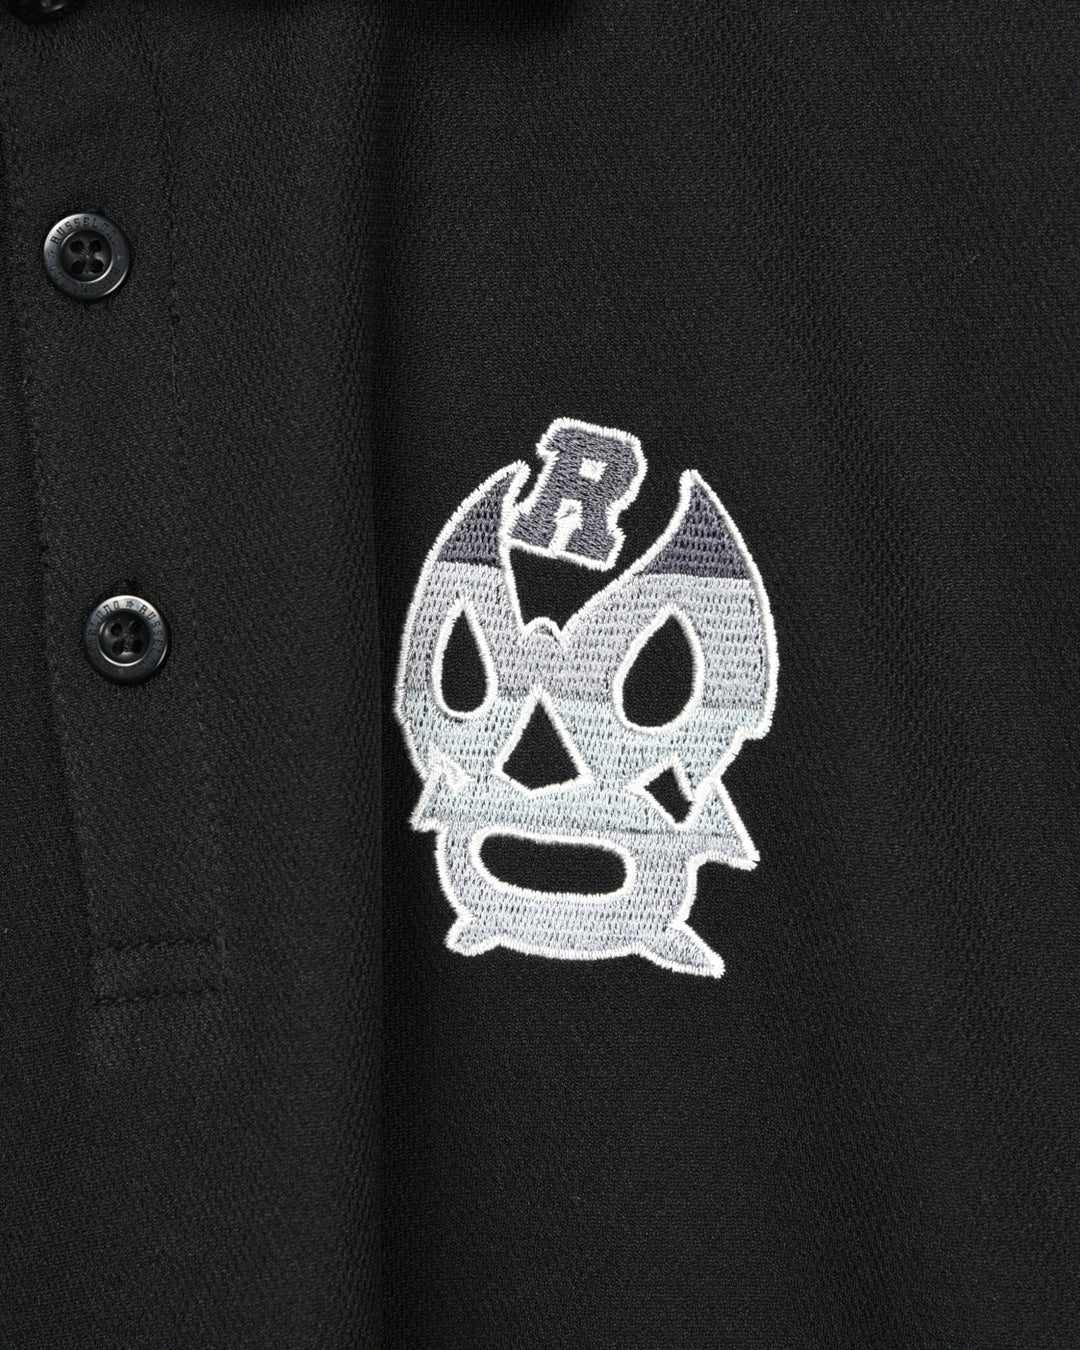 Lucha coat of arms polo